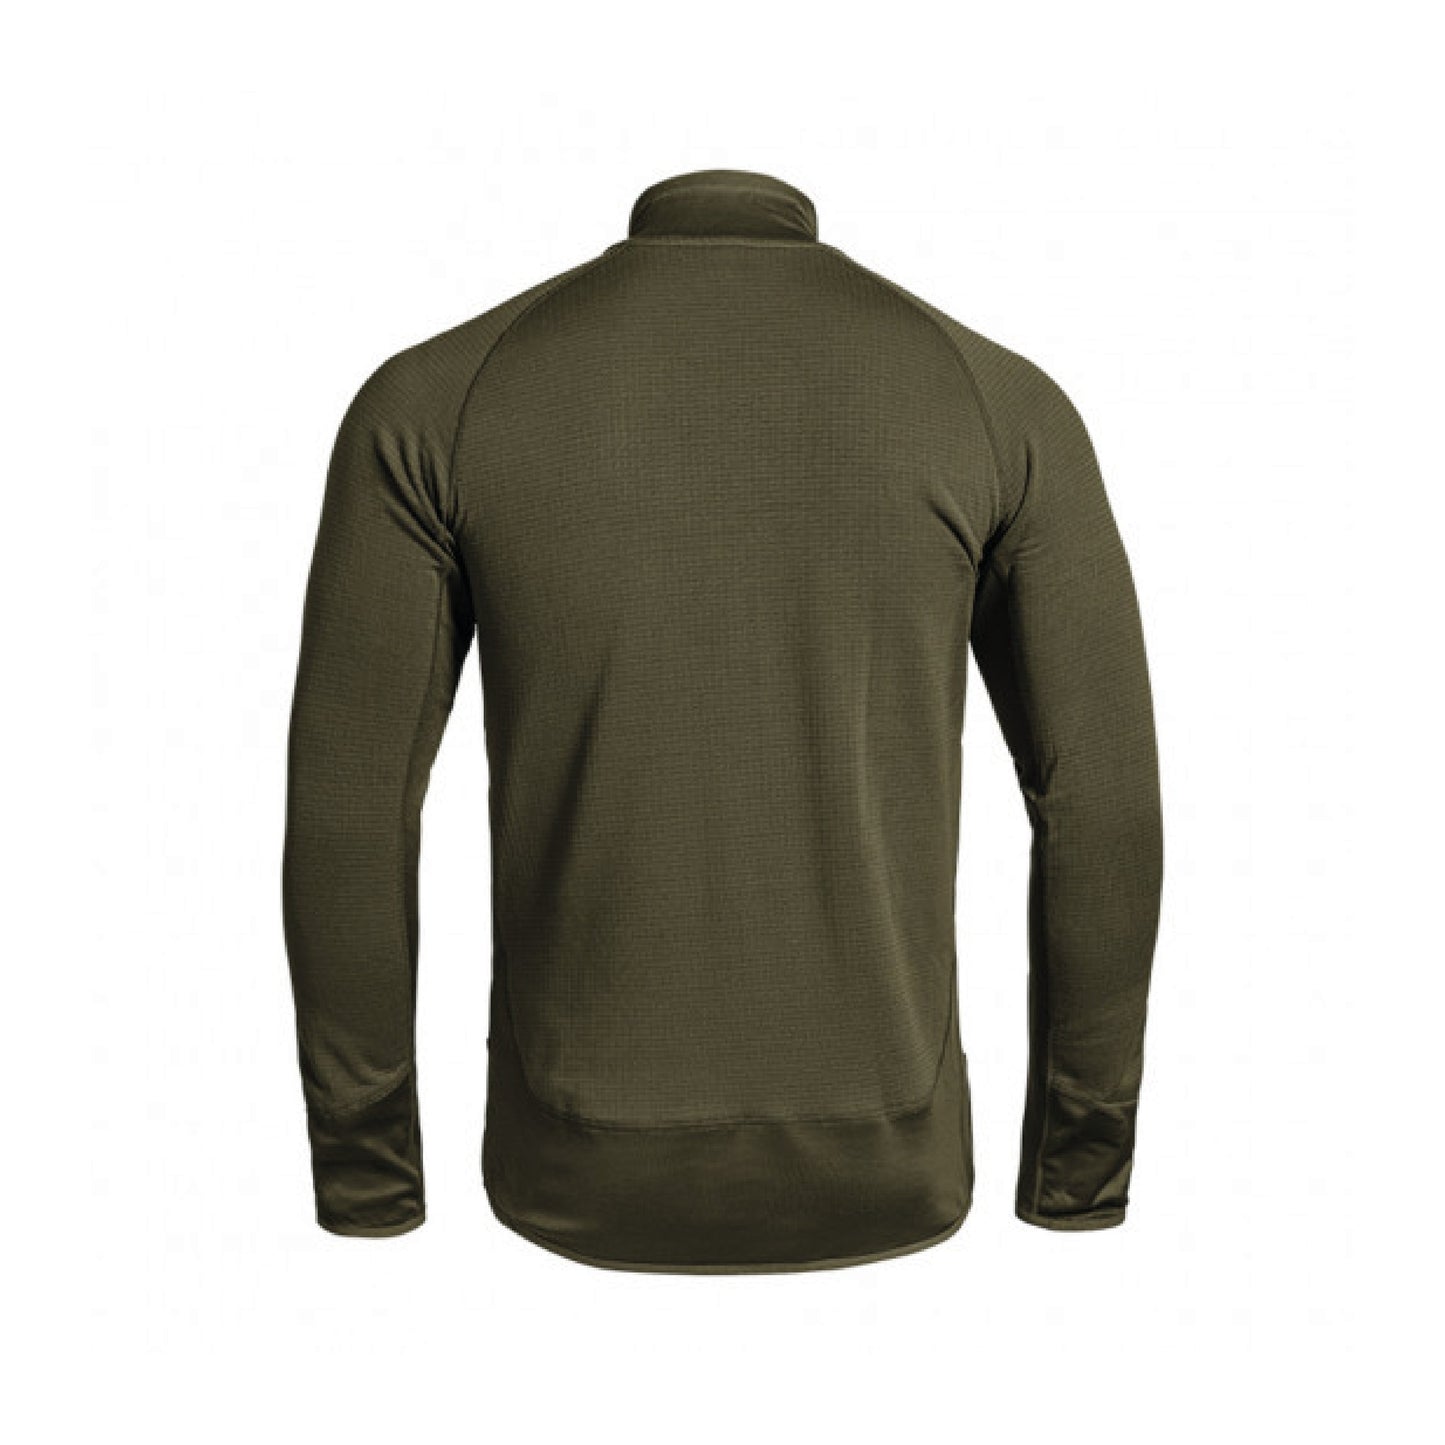 A10 Thermo Performer Basis-Jacke oliv